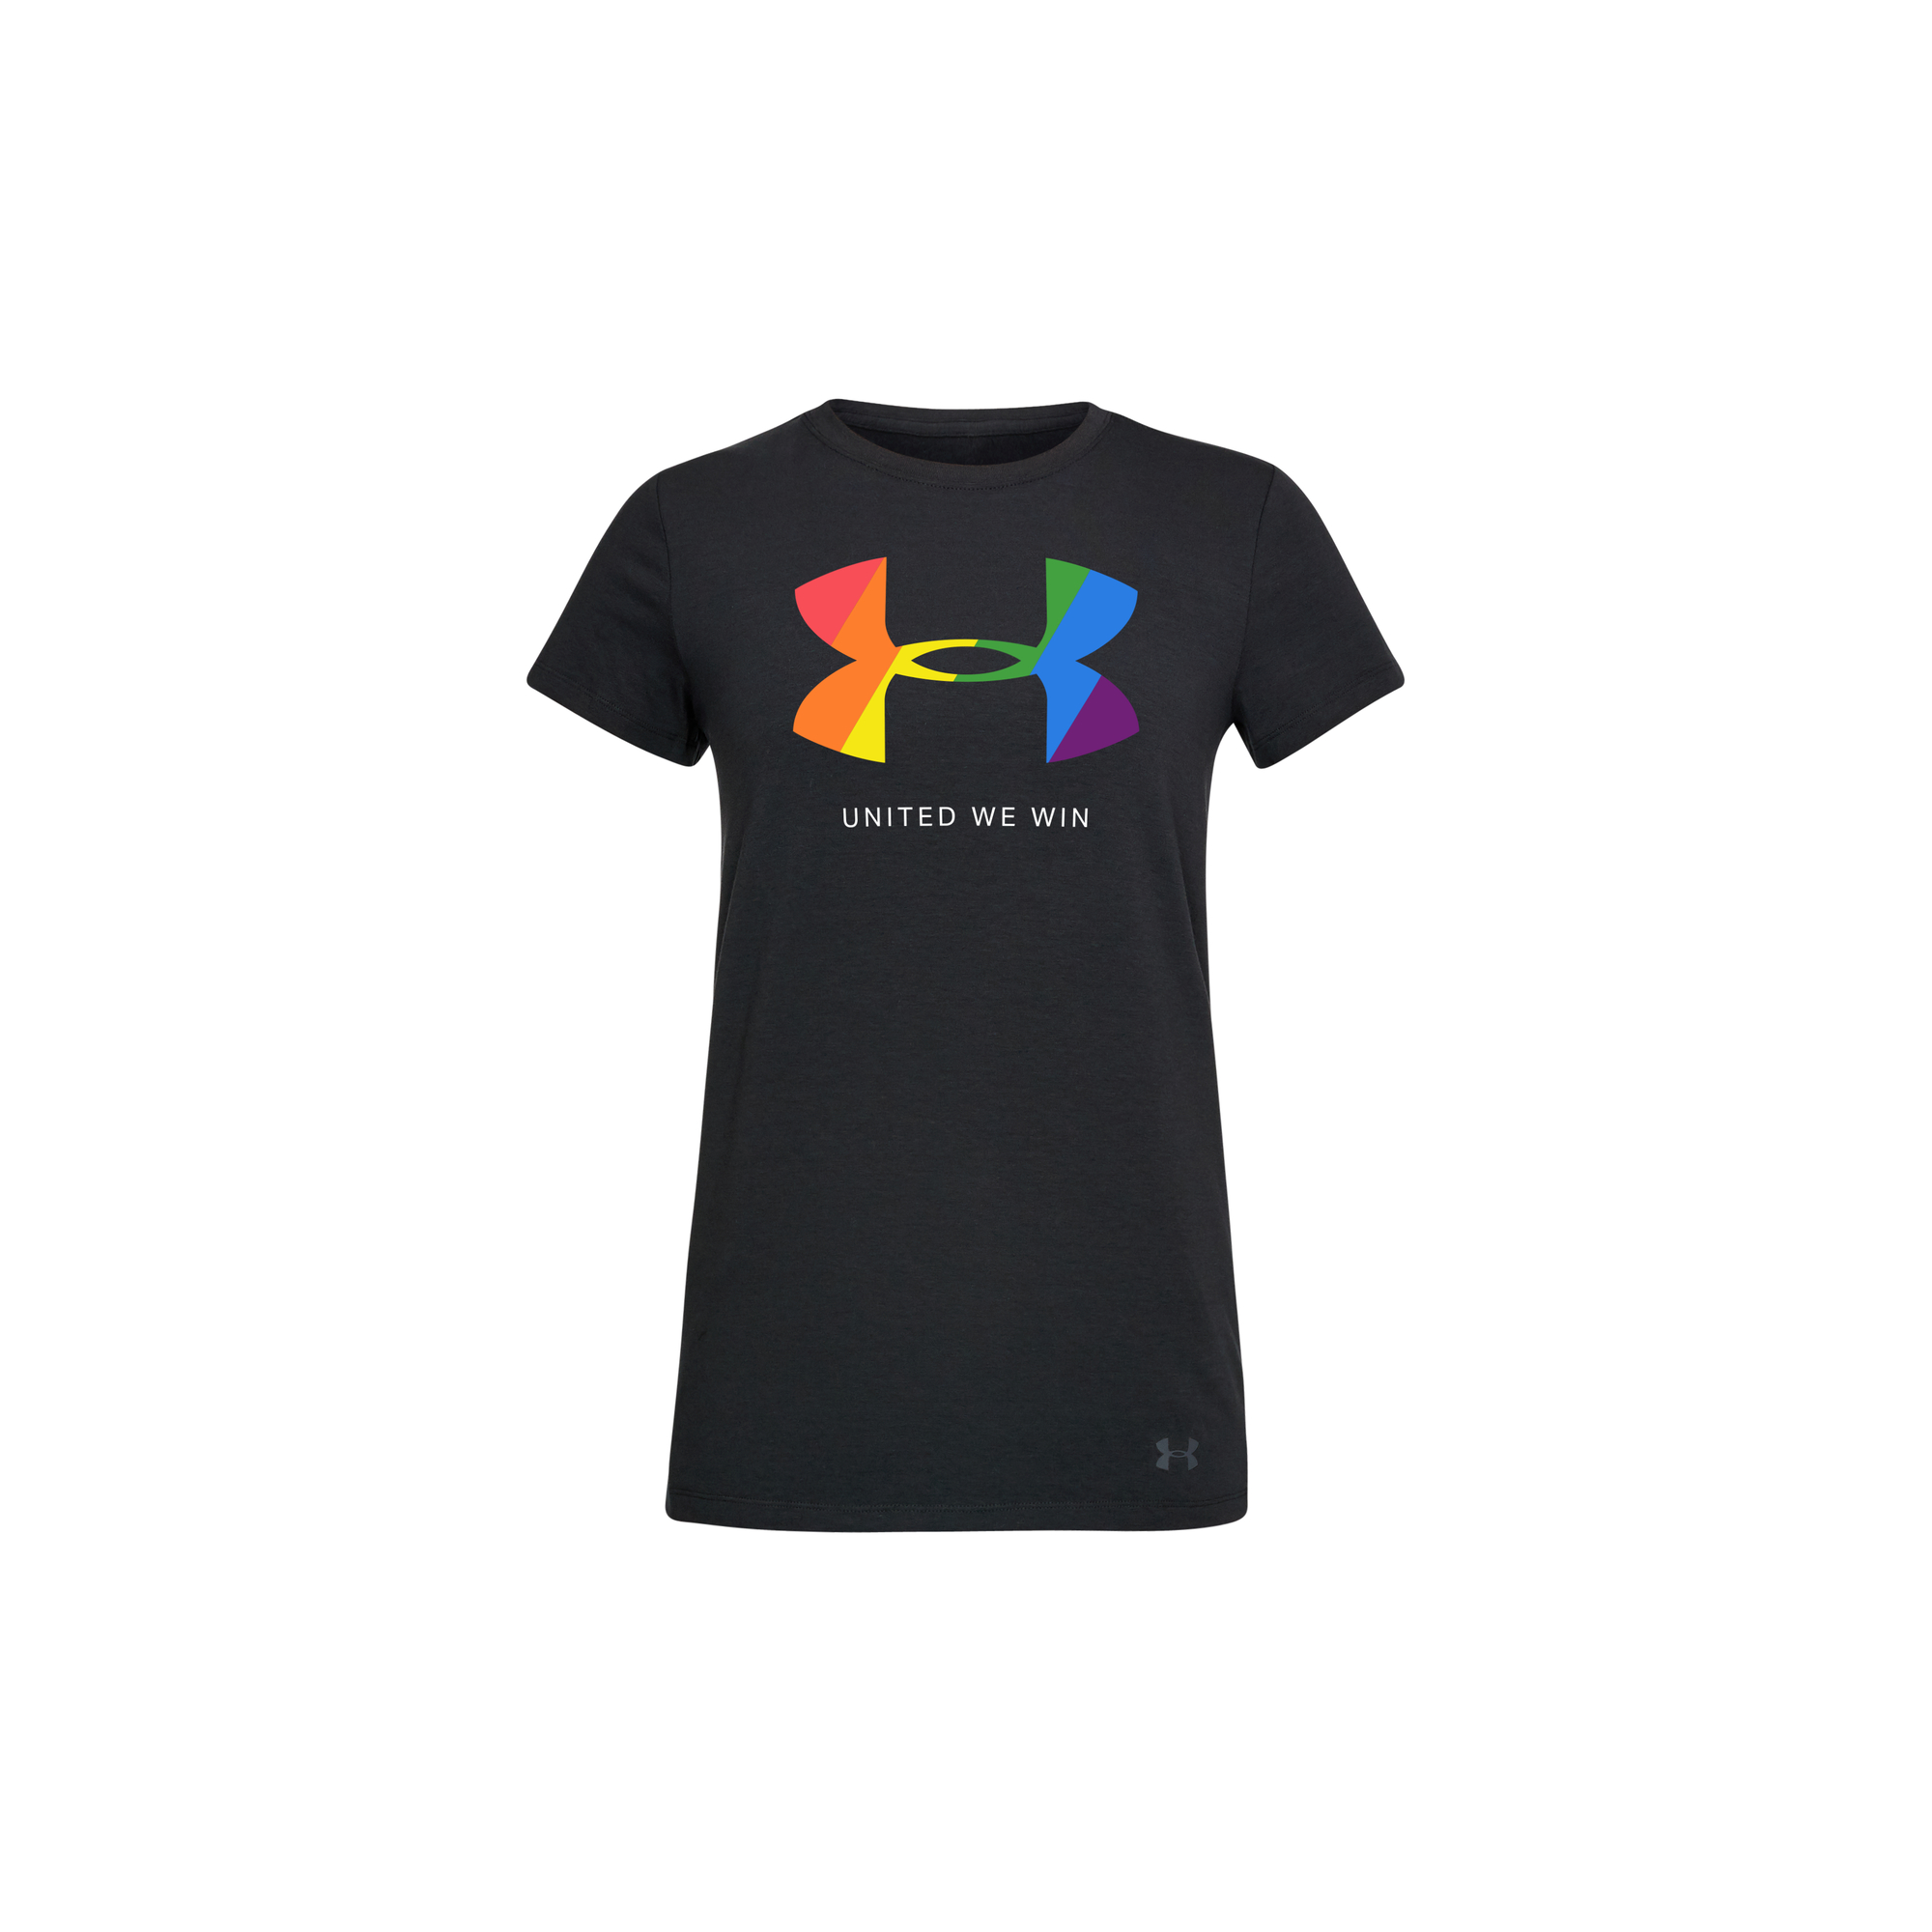 Under Armour pride collection tee